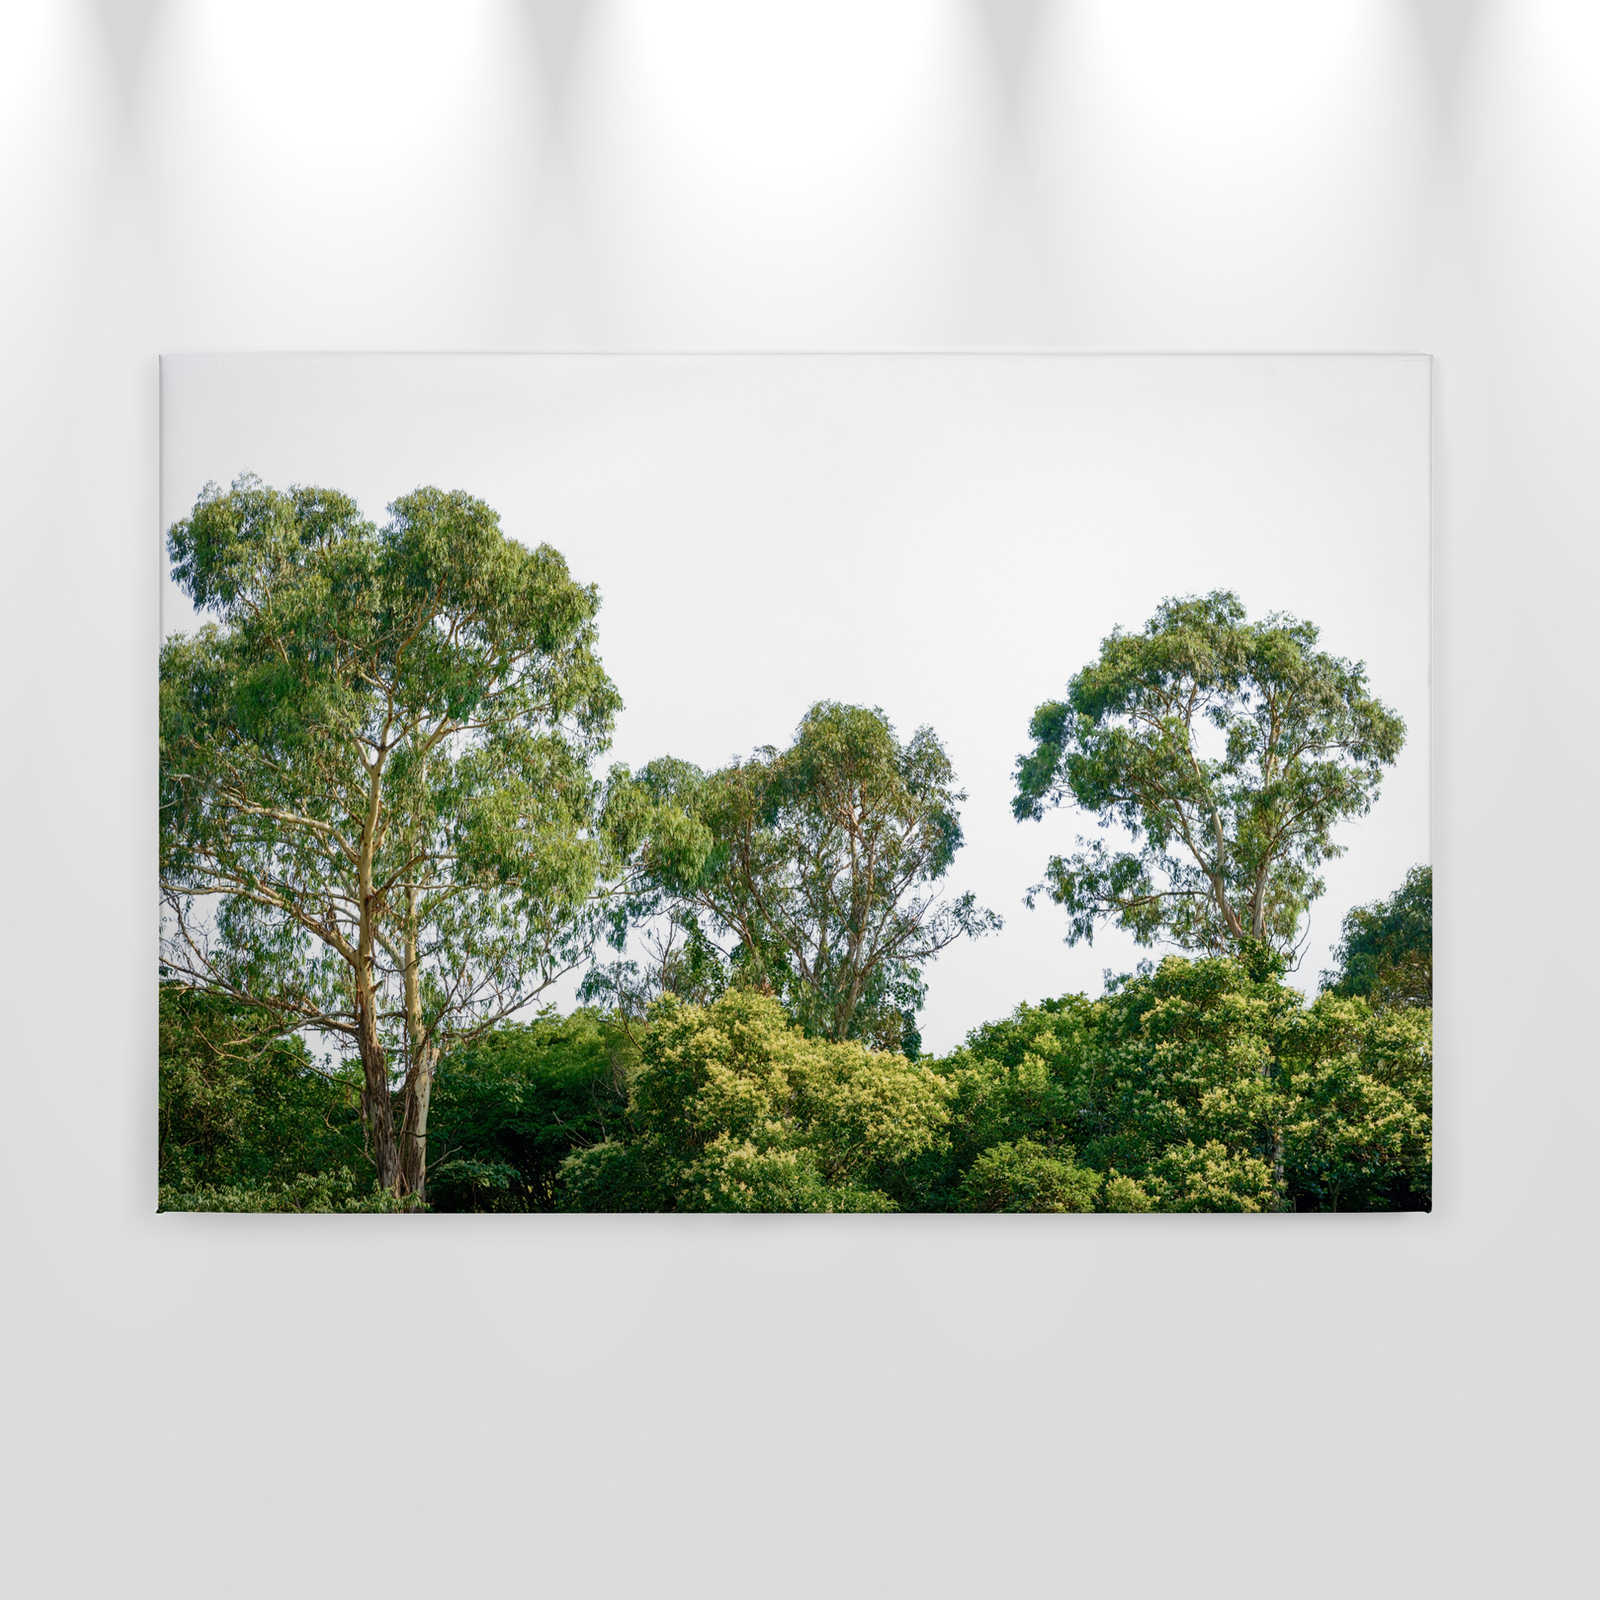             Canvas with treetops, forest motif - 0.90 m x 0.60 m
        